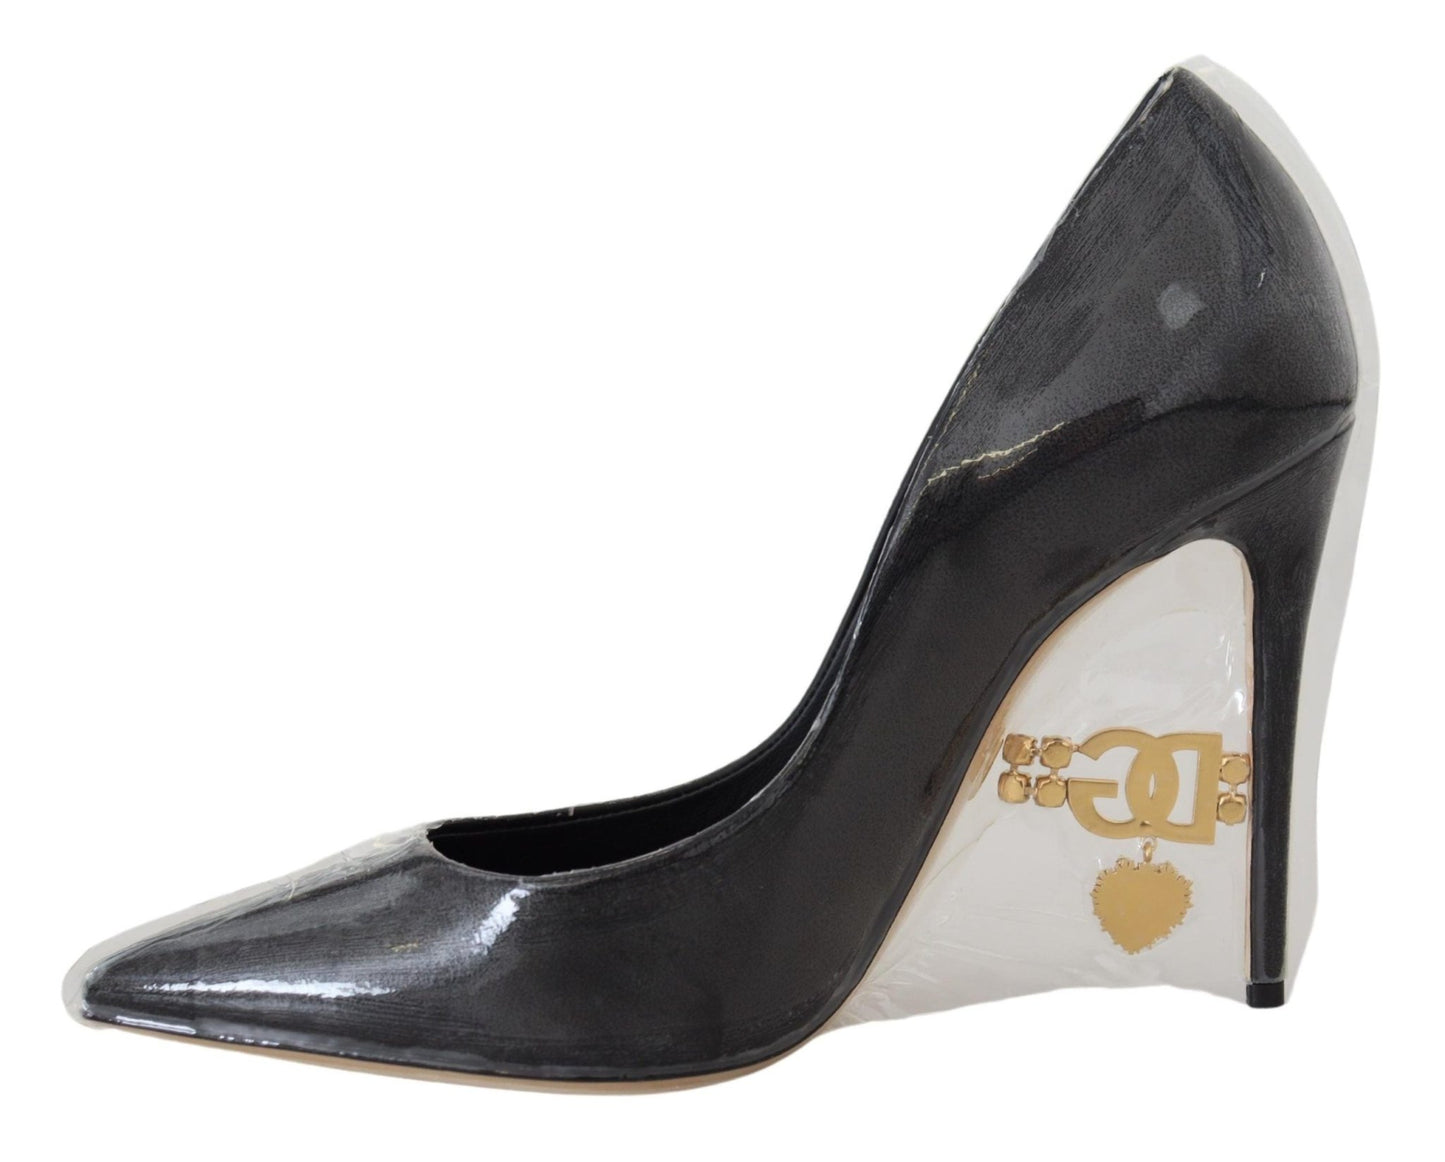 Dolce & Gabbana Black Leather Heels Pumps Plastic Wrapped Shoes